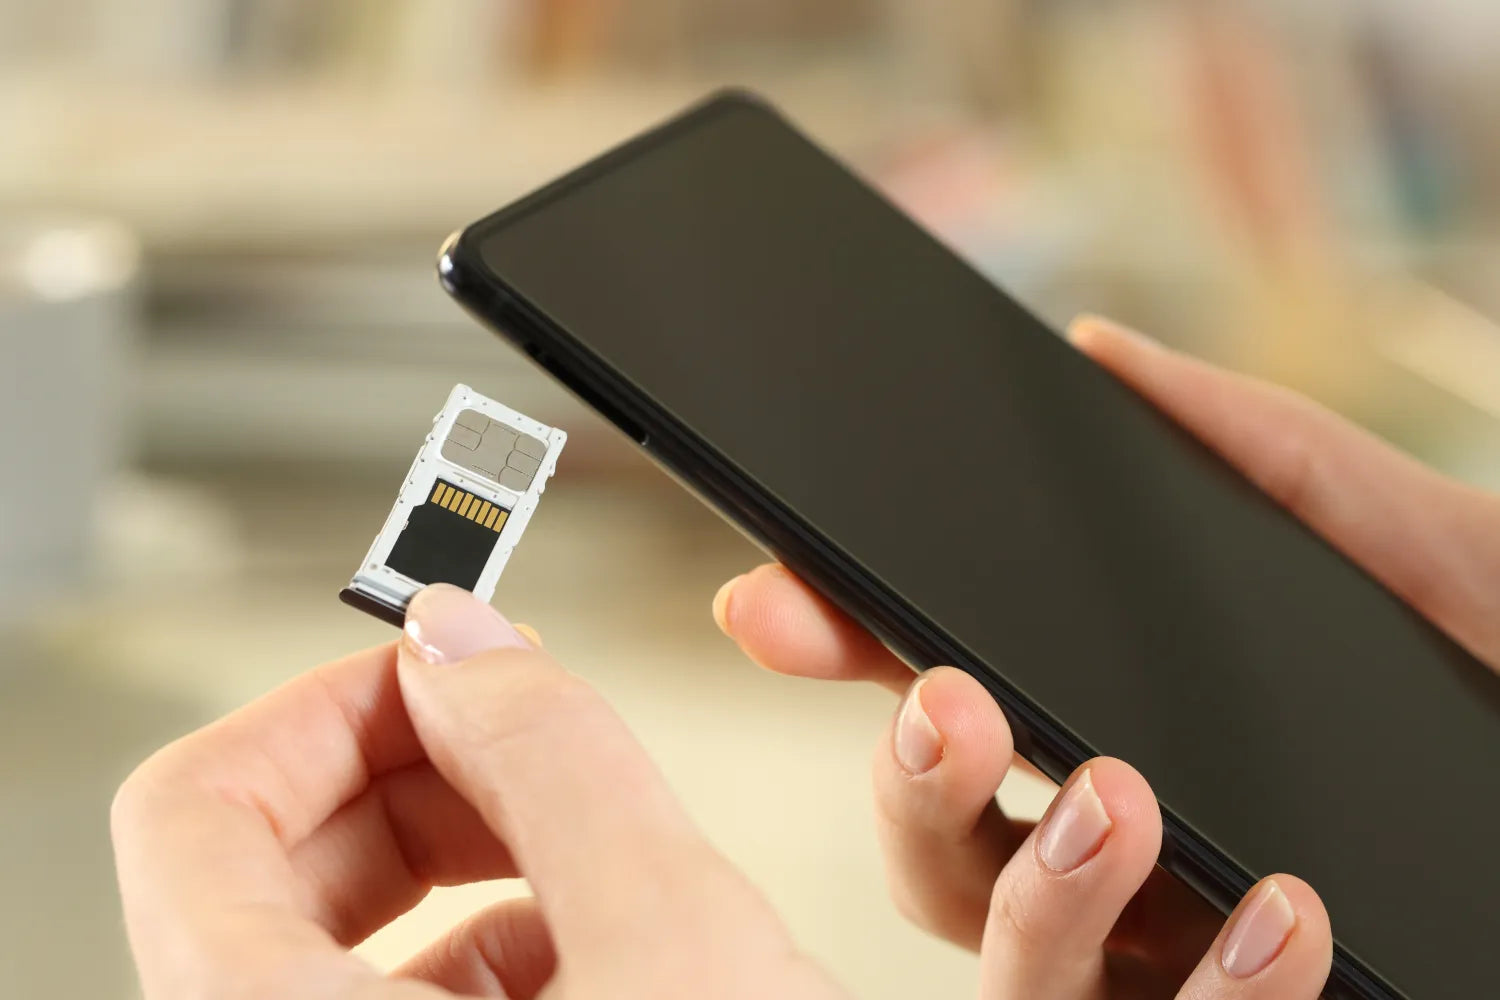 When Should I Insert My Travel Physical SIM Card?